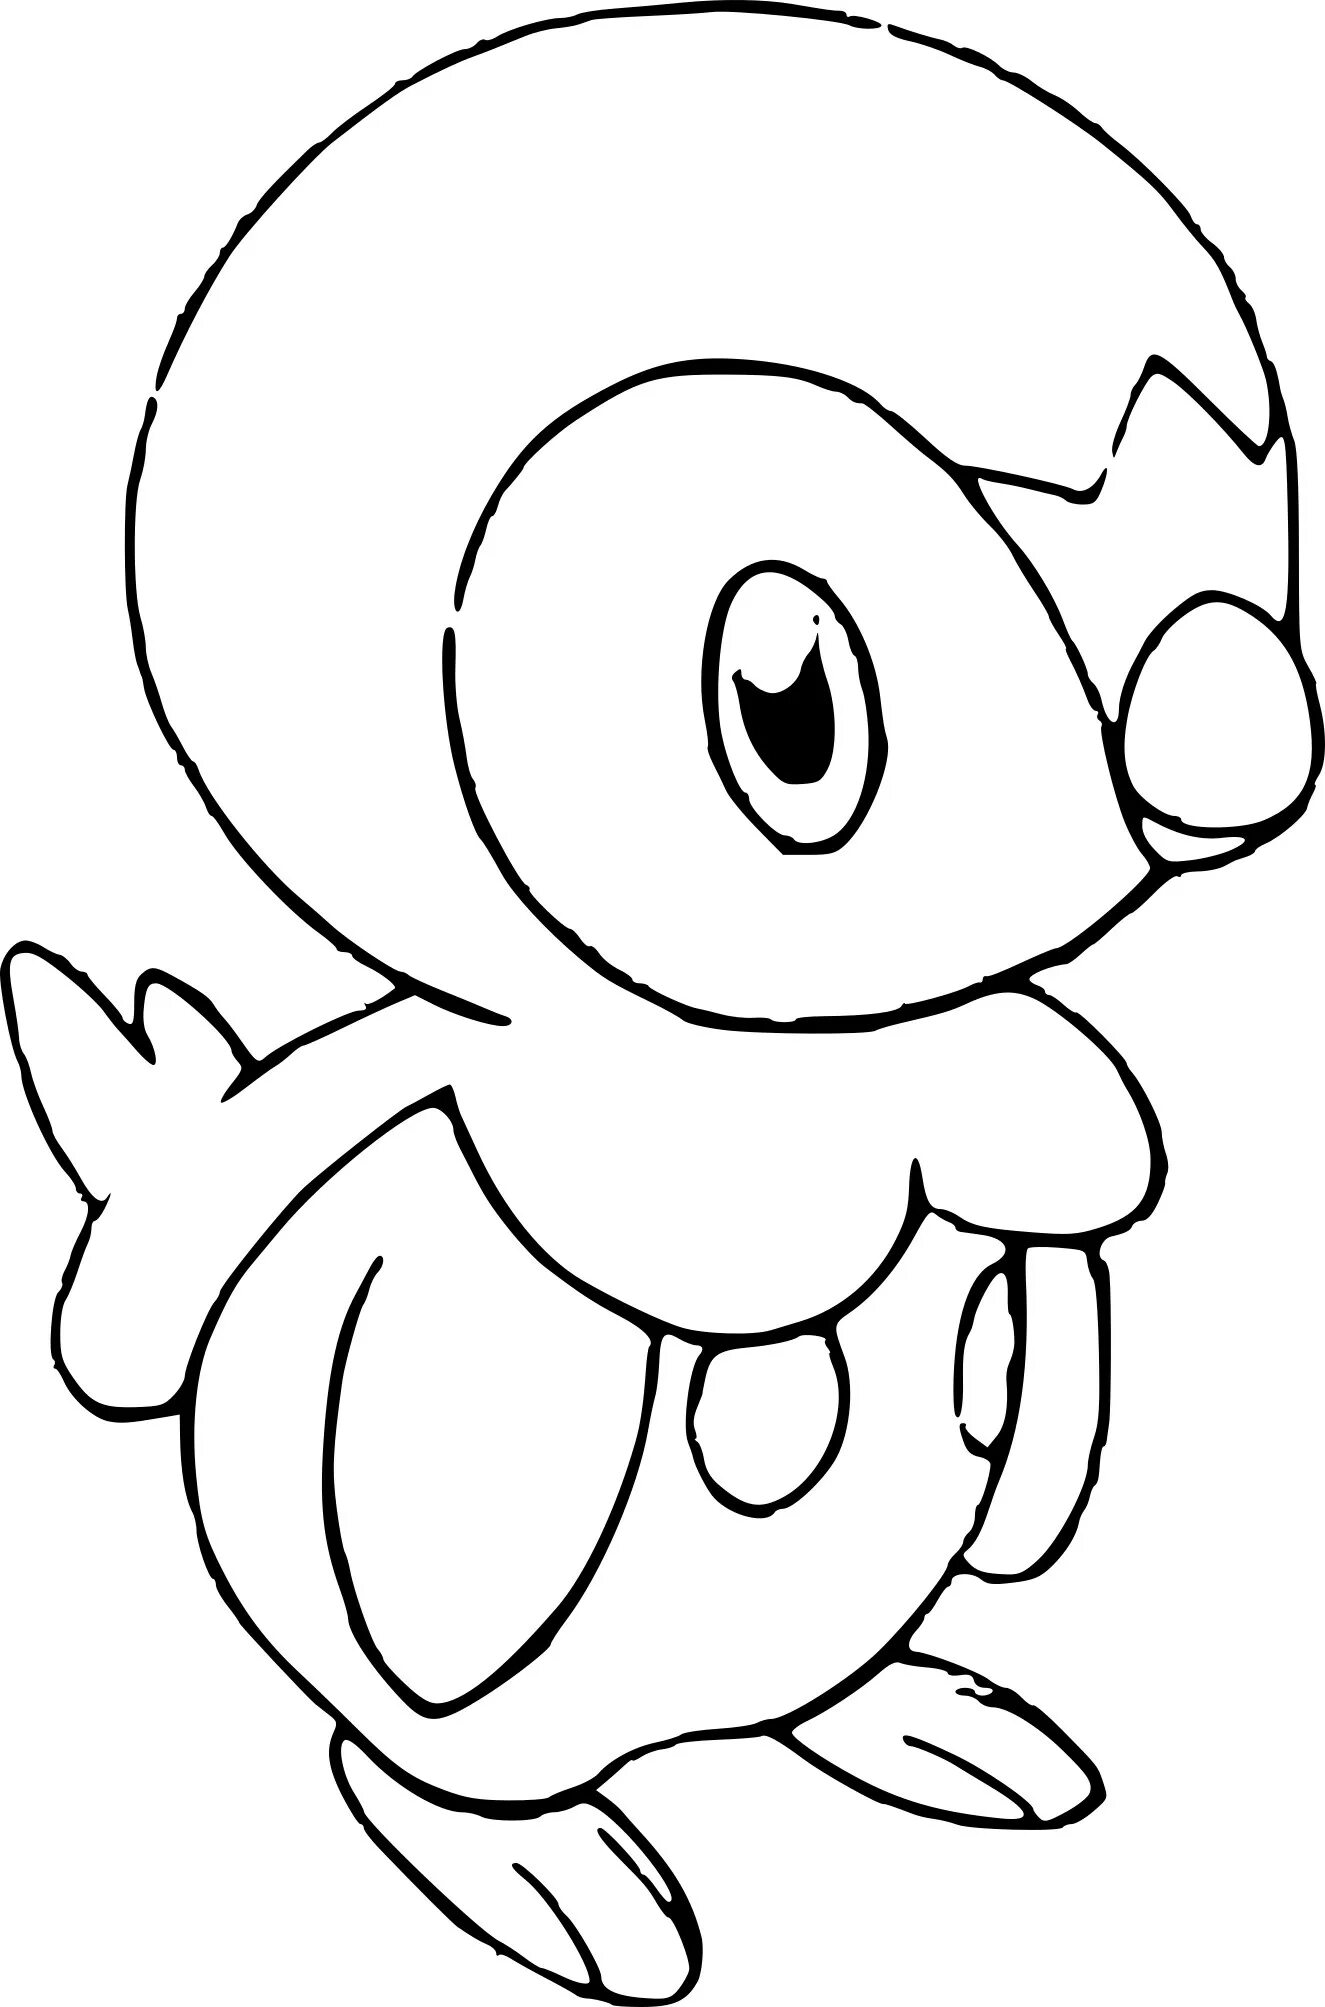 Coloring page stylish piplup pokemon